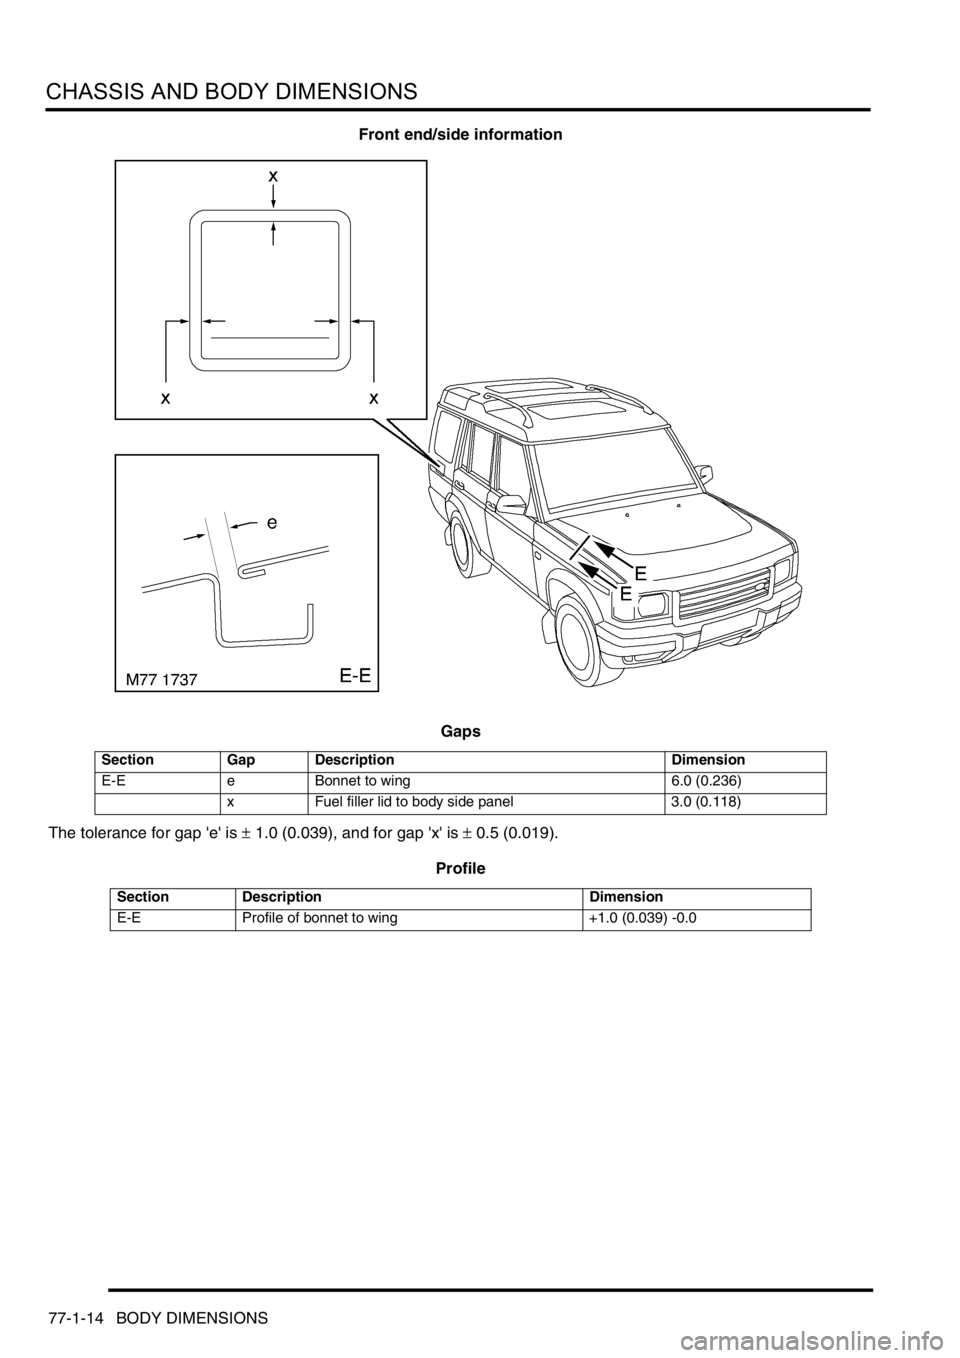 LAND ROVER DISCOVERY 2002 Owners Guide CHASSIS AND BODY DIMENSIONS
77-1-14 BODY DIMENSIONS
Front end/side information
Gaps
The tolerance for gap e is 
± 1.0 (0.039), and for gap x is ± 0.5 (0.019).
Profile
Section Gap Description Dim